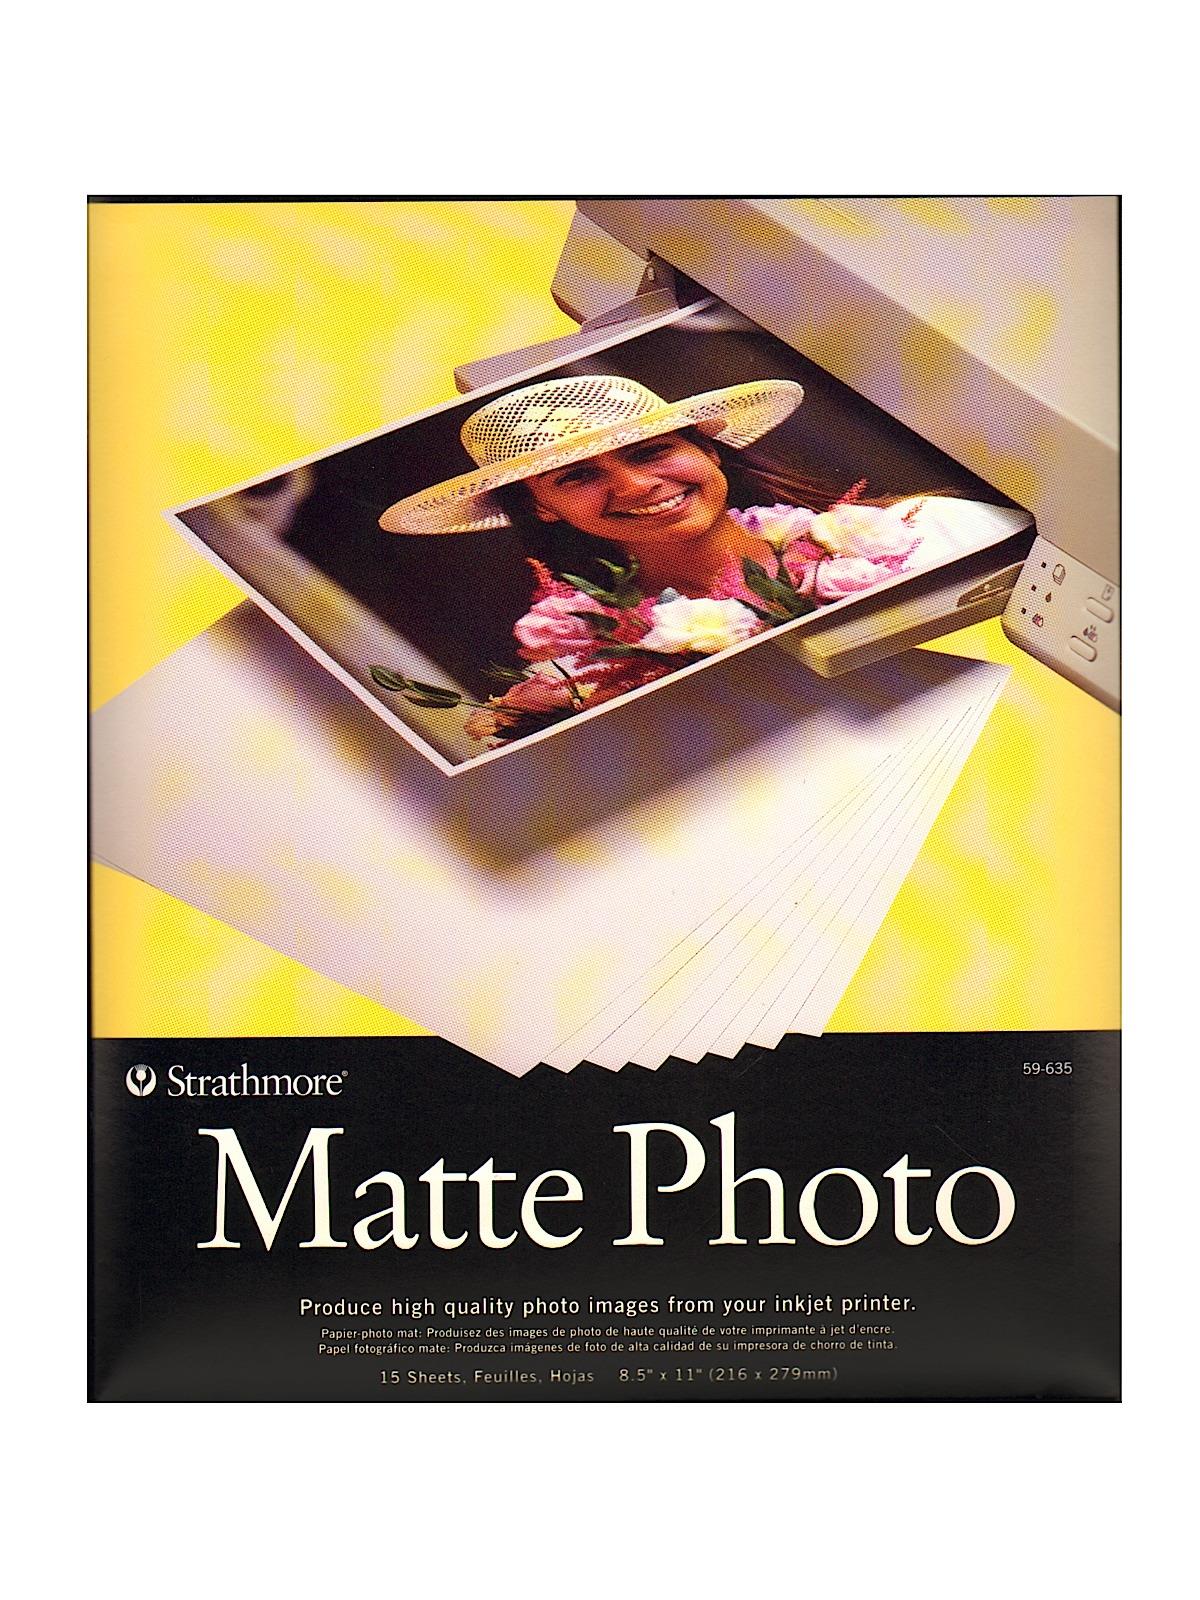 Strathmore Digital Photo Paper matte 8.5 in. x 11 in. pack of 15